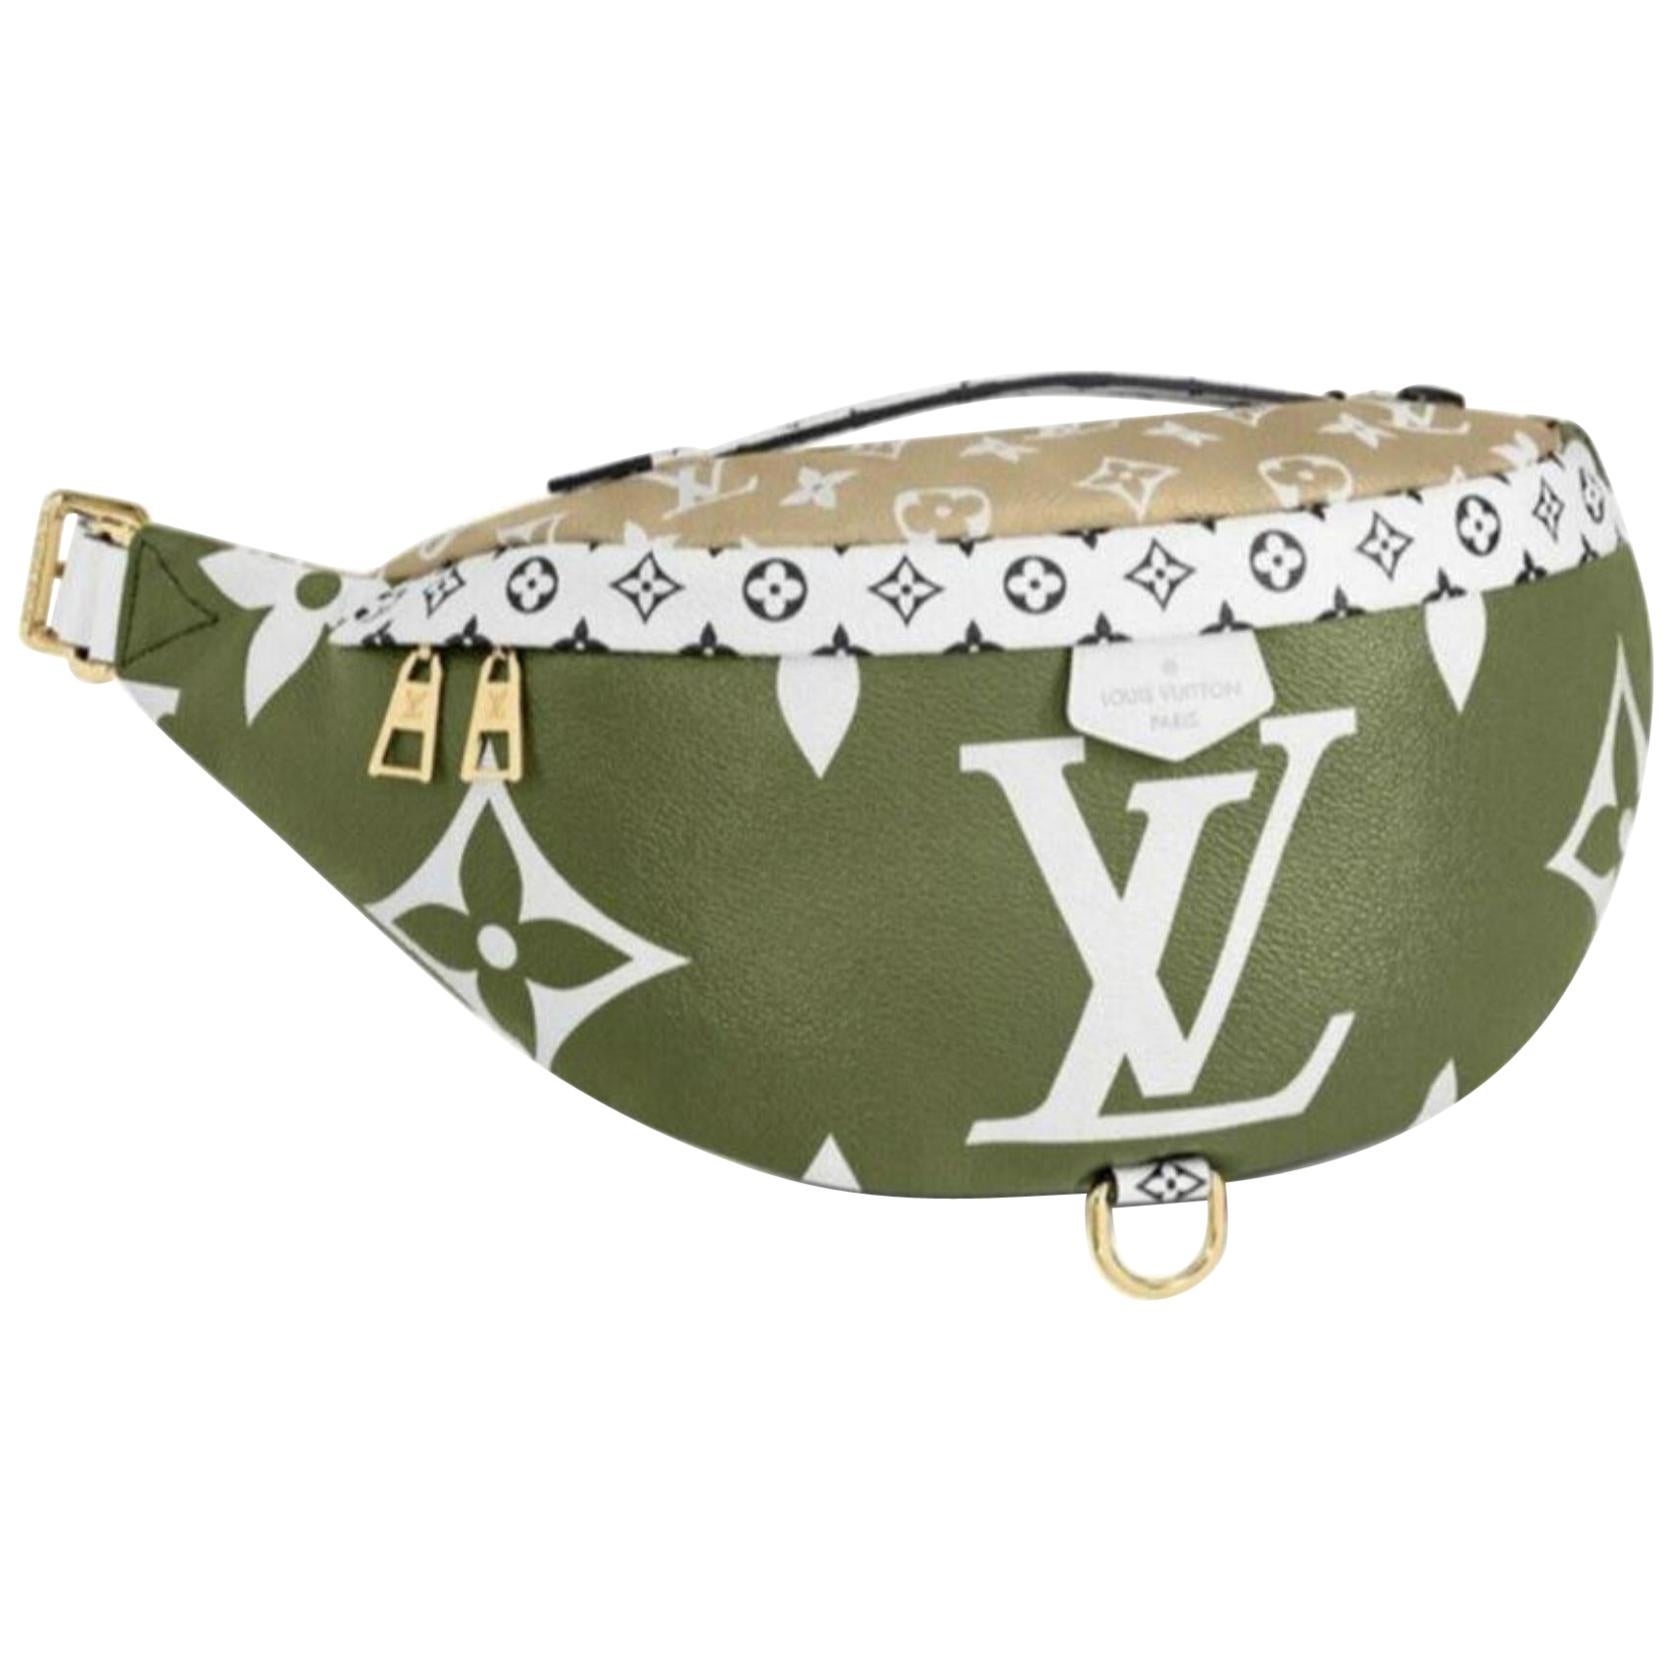 Louis Vuitton Bumbag Giant Limited Fanny Pack Waist Pouch 870621 Cross Body Bag For Sale